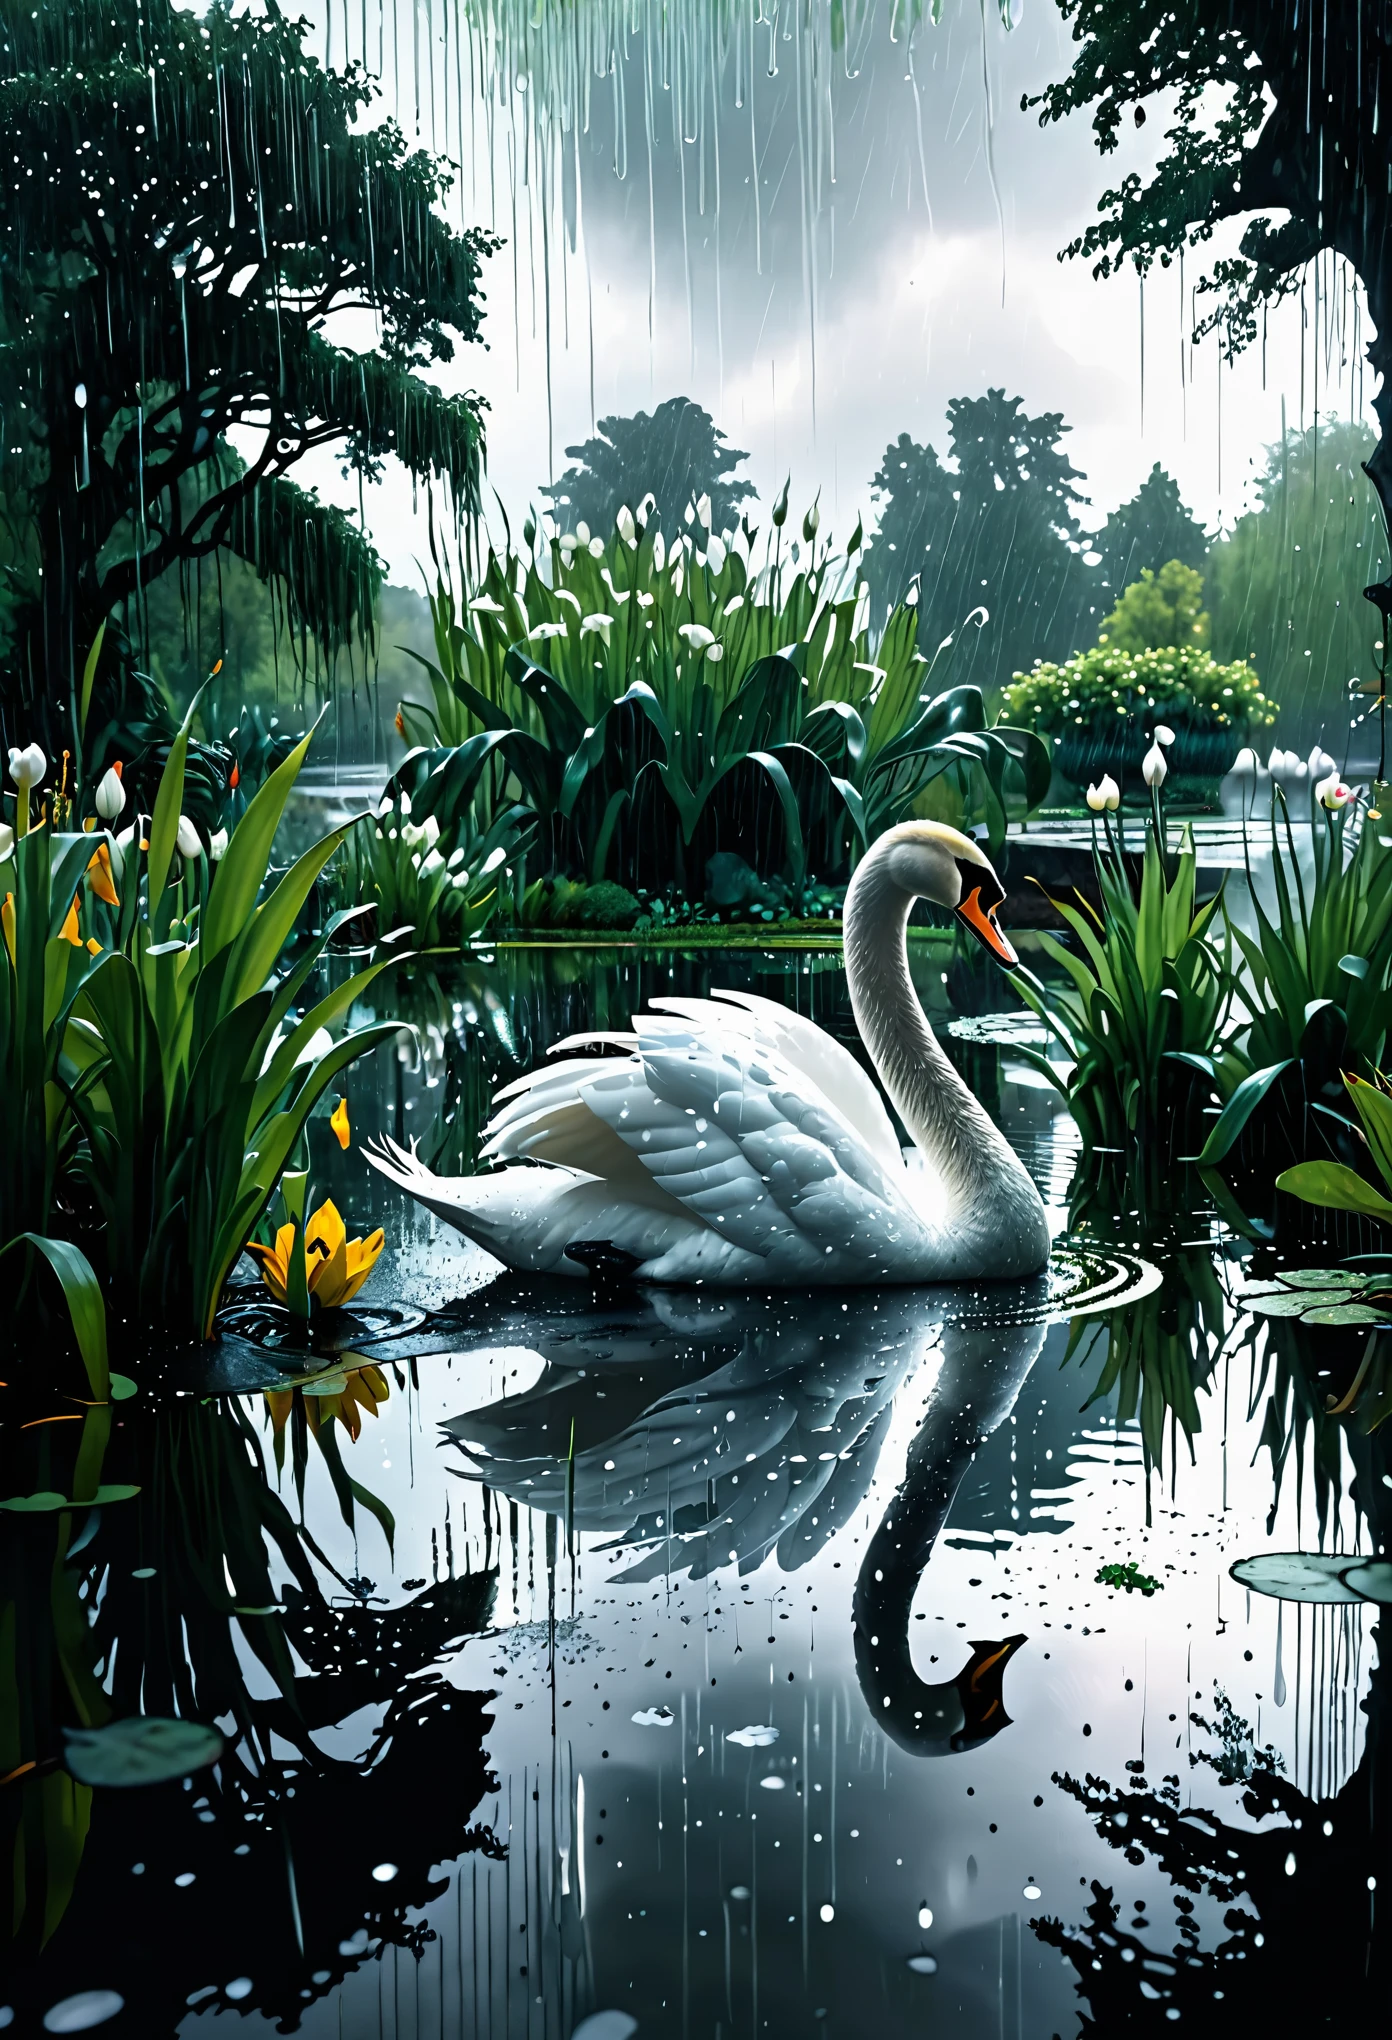 (realistic rendering:1.2),(ultra wide lens),(double exposure),(fantasy movie),(rain),(pond),(swan),(vibrant colors),(golden hour lighting),(reflection),(mysterious atmosphere),(dreamlike),(ethereal),(misty),(cinematic quality),(fog),(captivating composition),(subtle details),(moody),(silhouette),(dramatic),(water droplets),(emotive),(mesmerizing),(ephemeral),(serene),(enchanting),(surreal),(soft focus),(mystical),(shadow play),(timeless),(artistic),(intricate texture),(whimsical),(enigmatic),(beautiful contrast),(magical),(hidden beauty),(harmonious),(illuminated),(ethereal),(serene),(enchanting),(surreal),(soft focus),(mystical),(shadow play),(timeless),(artistic),(intricate texture),(whimsical),(enigmatic),(beautiful contrast),(magical),(hidden beauty),(harmonious),(illuminated)